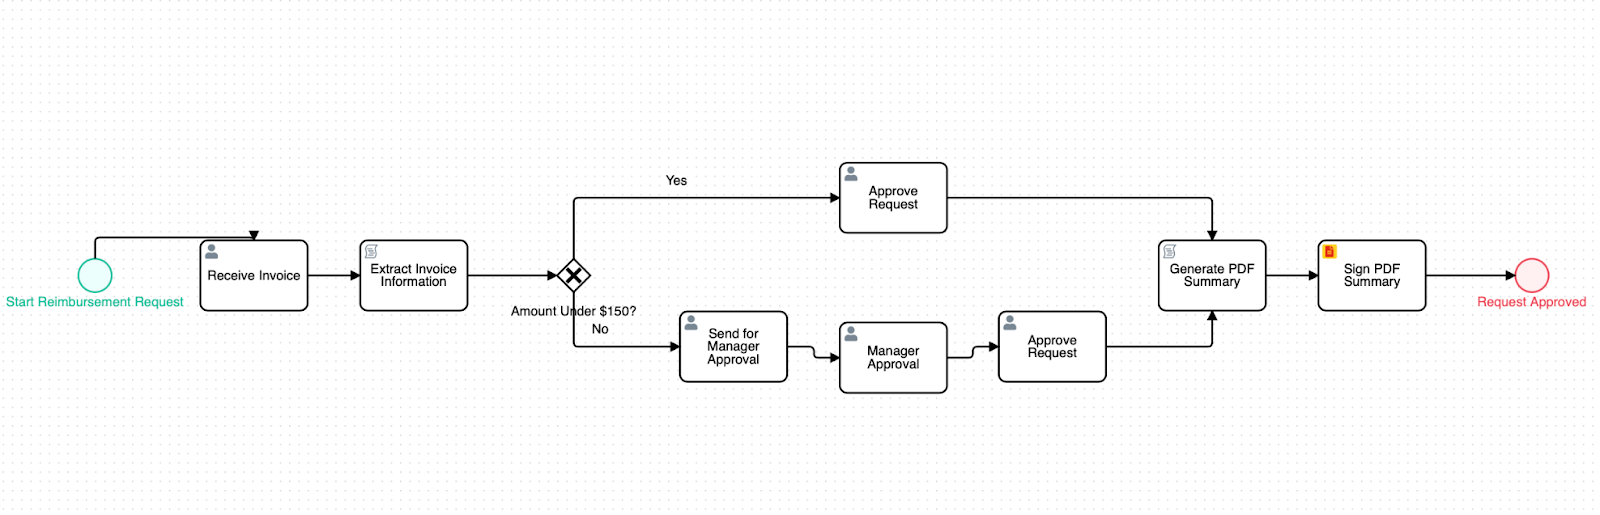 AI Assistant text to process output result, showing a flowchart process